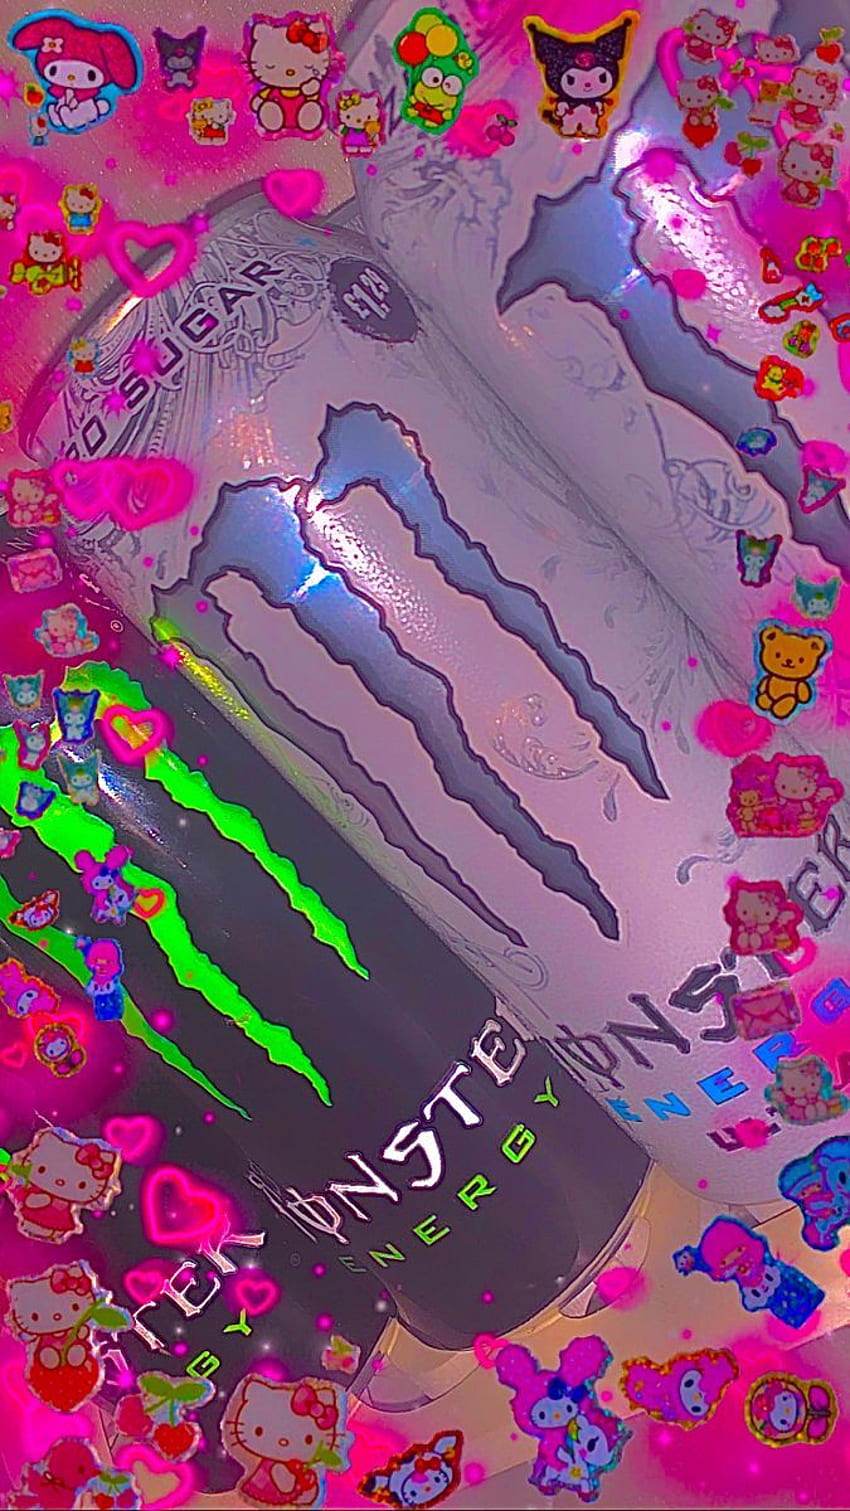 A can of monster energy with pink and green stickers - Indie